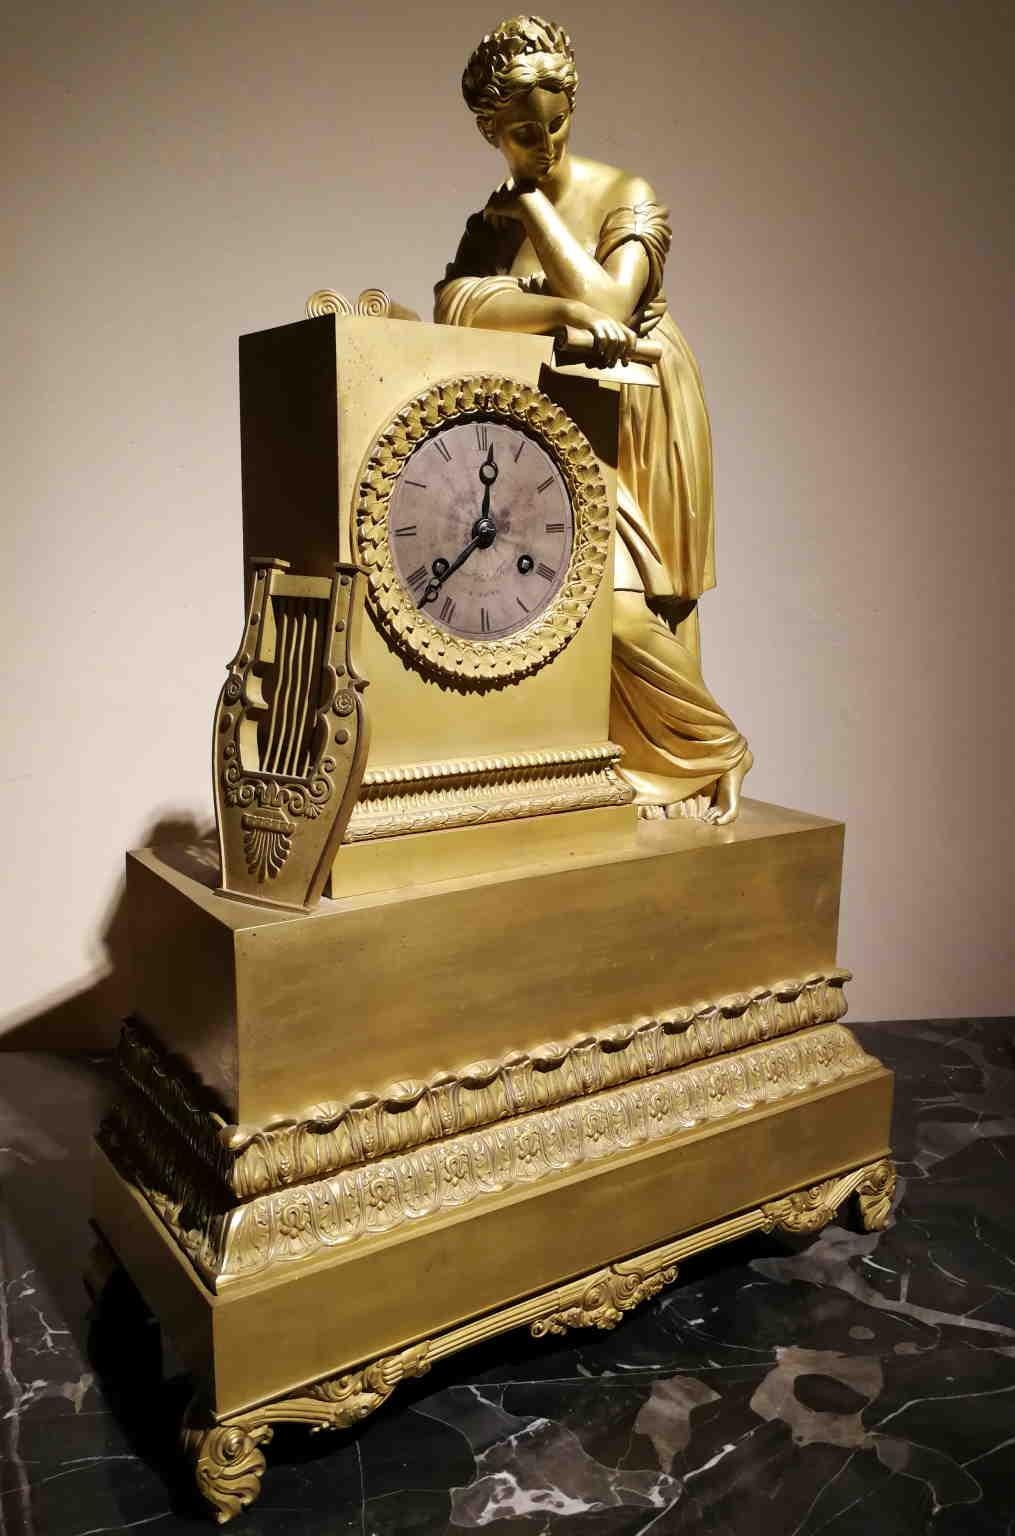 Swiss French Imperial Neoclassic Mantel Clock 19th century - Art by Honoré Pons